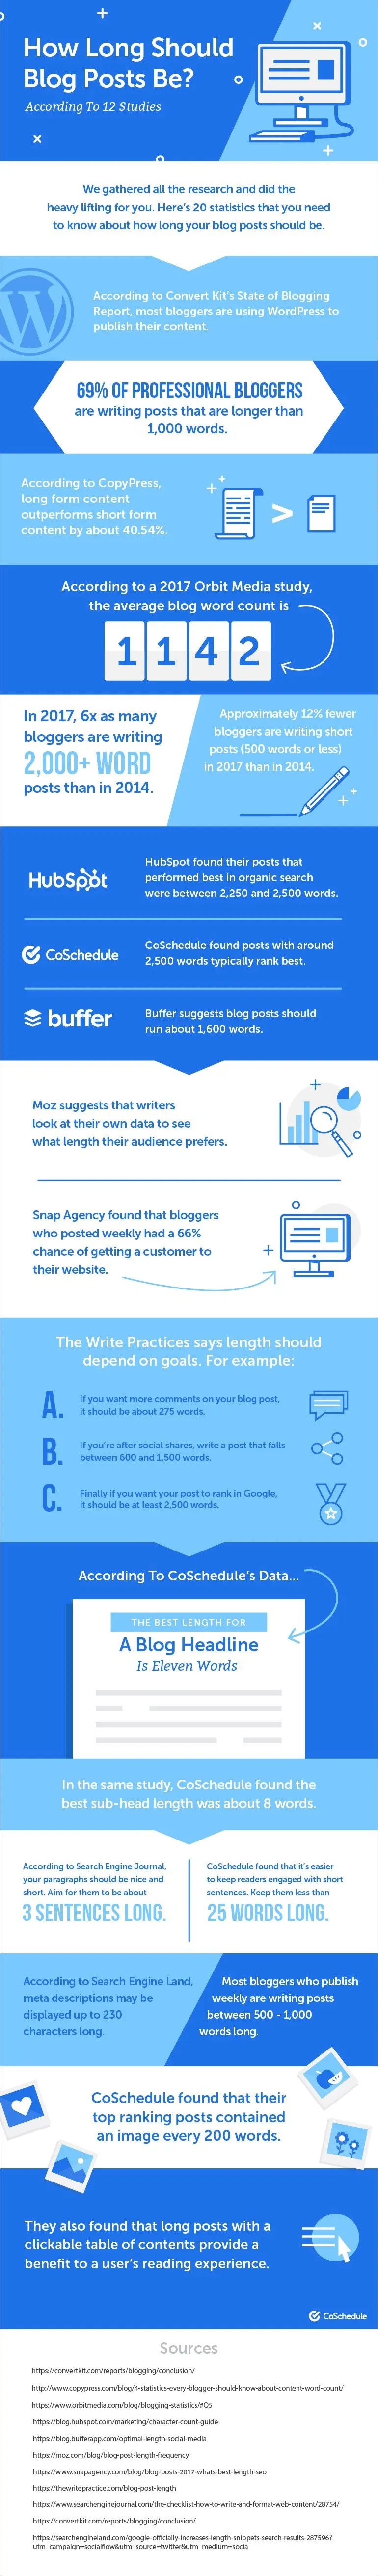 How Long Should a Blog Post Be to Get the Most Traffic and Shares? - #infographic